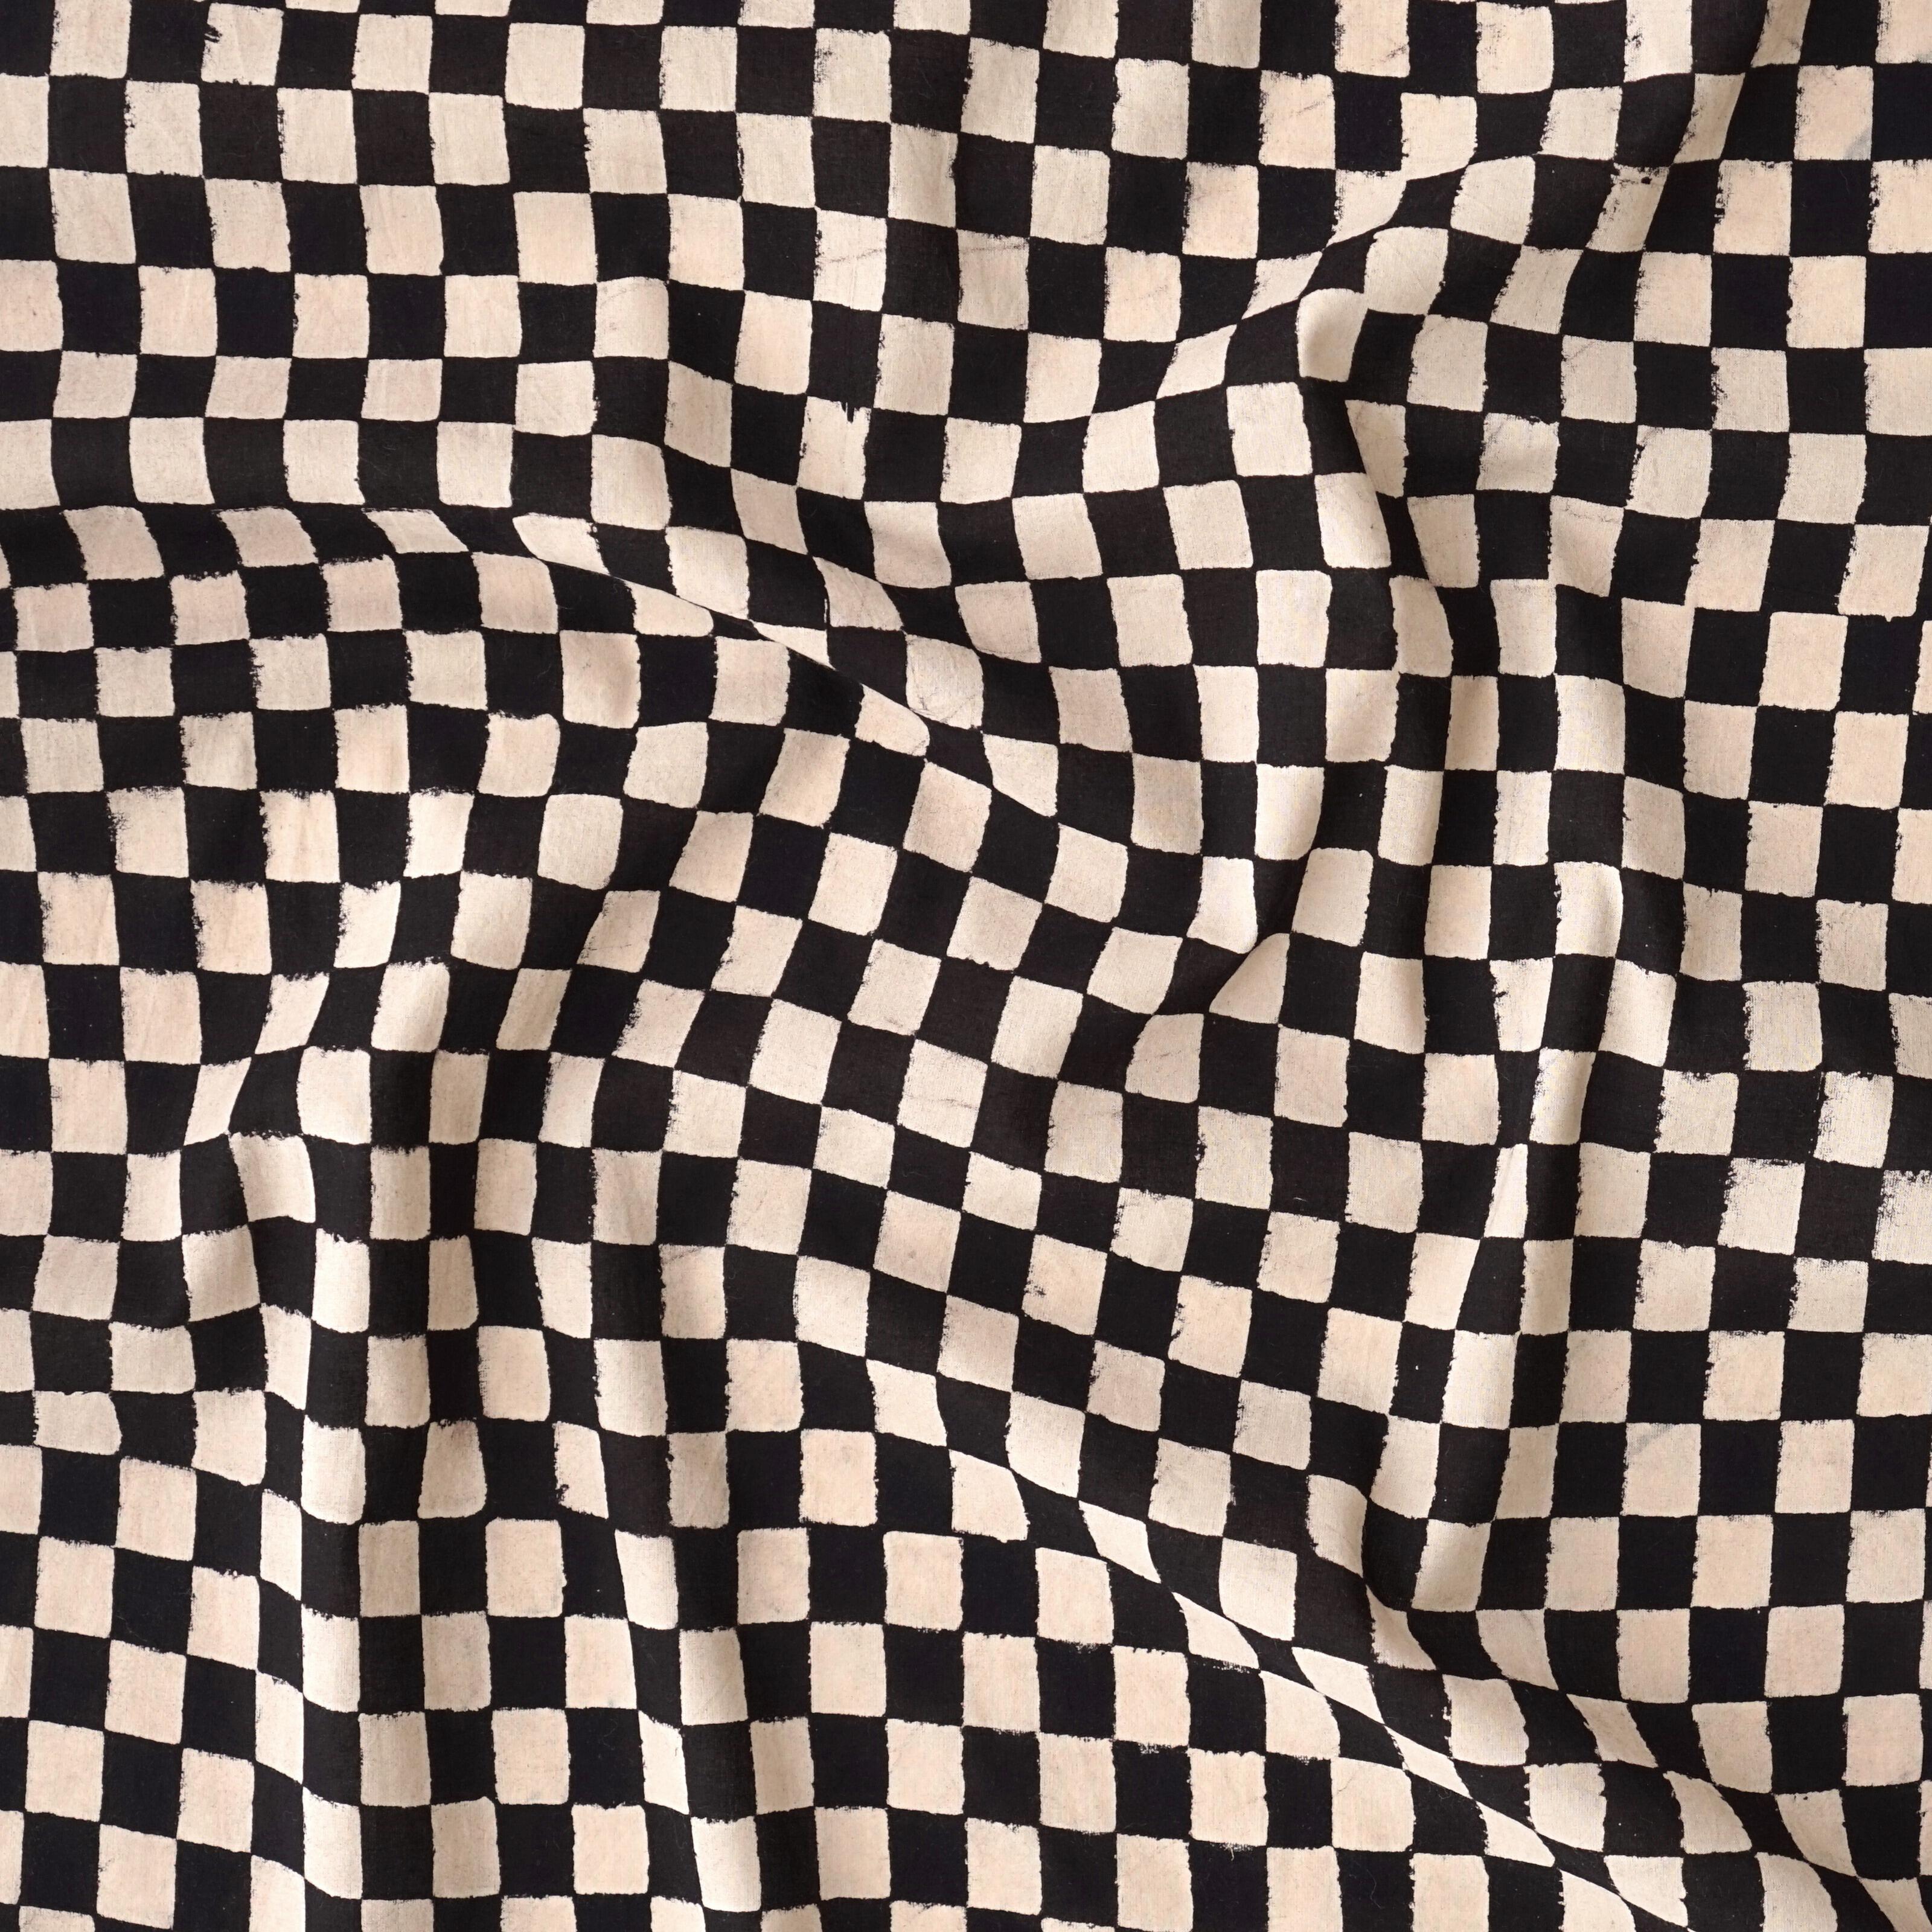 Woodblock-Printed Cotton - Checkers Print - Black & White - Contrast